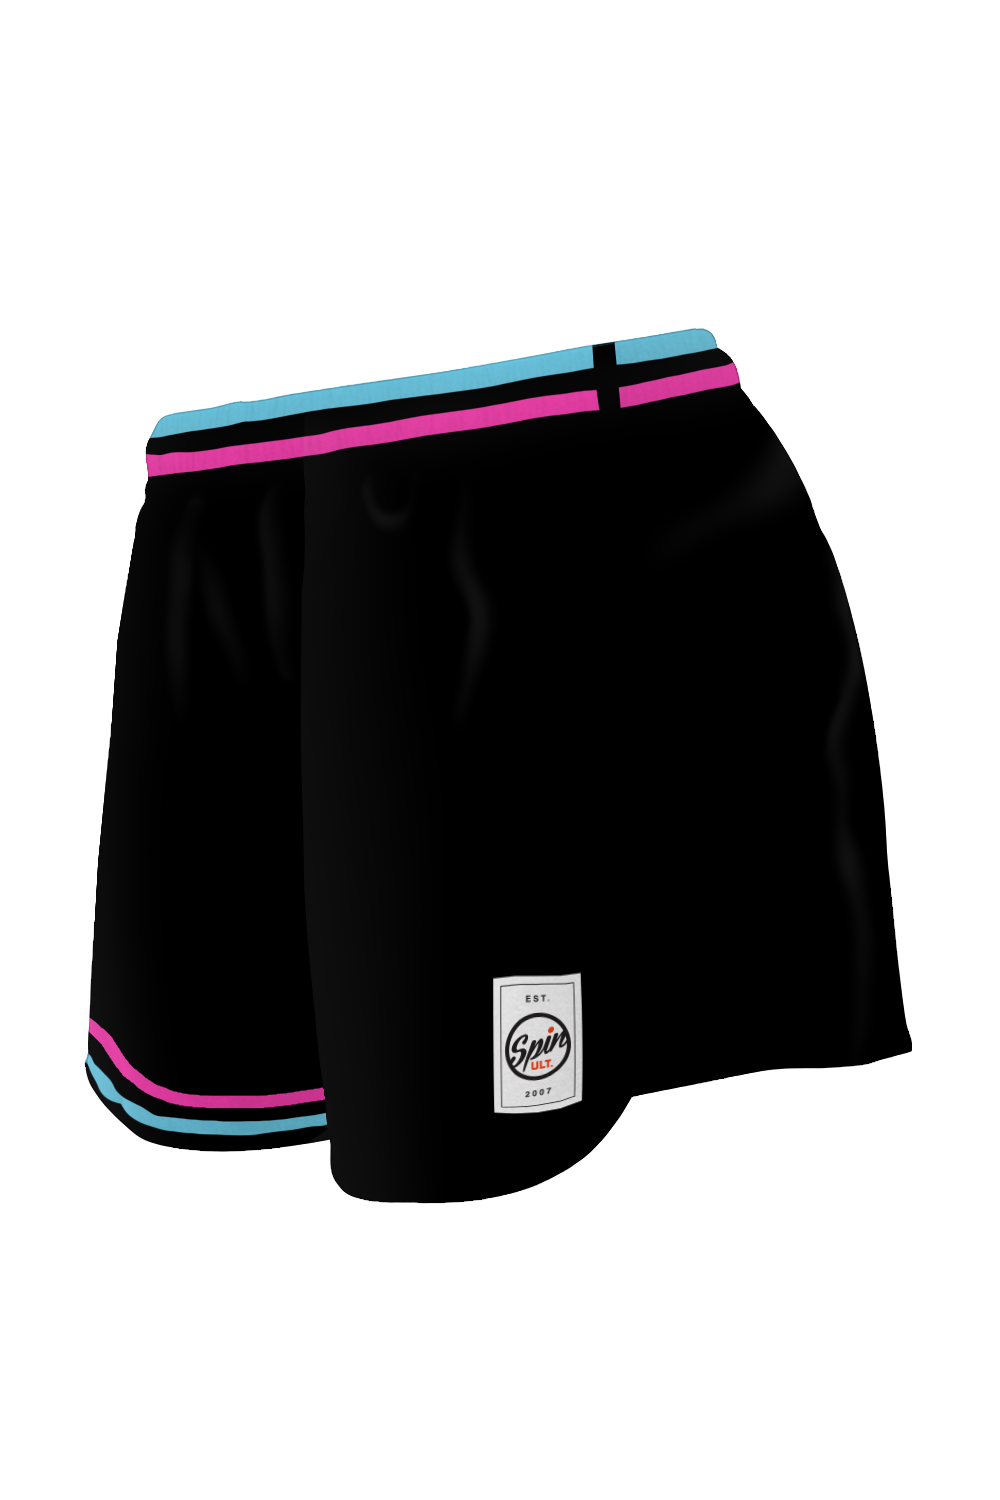 Vice Racer Shorts